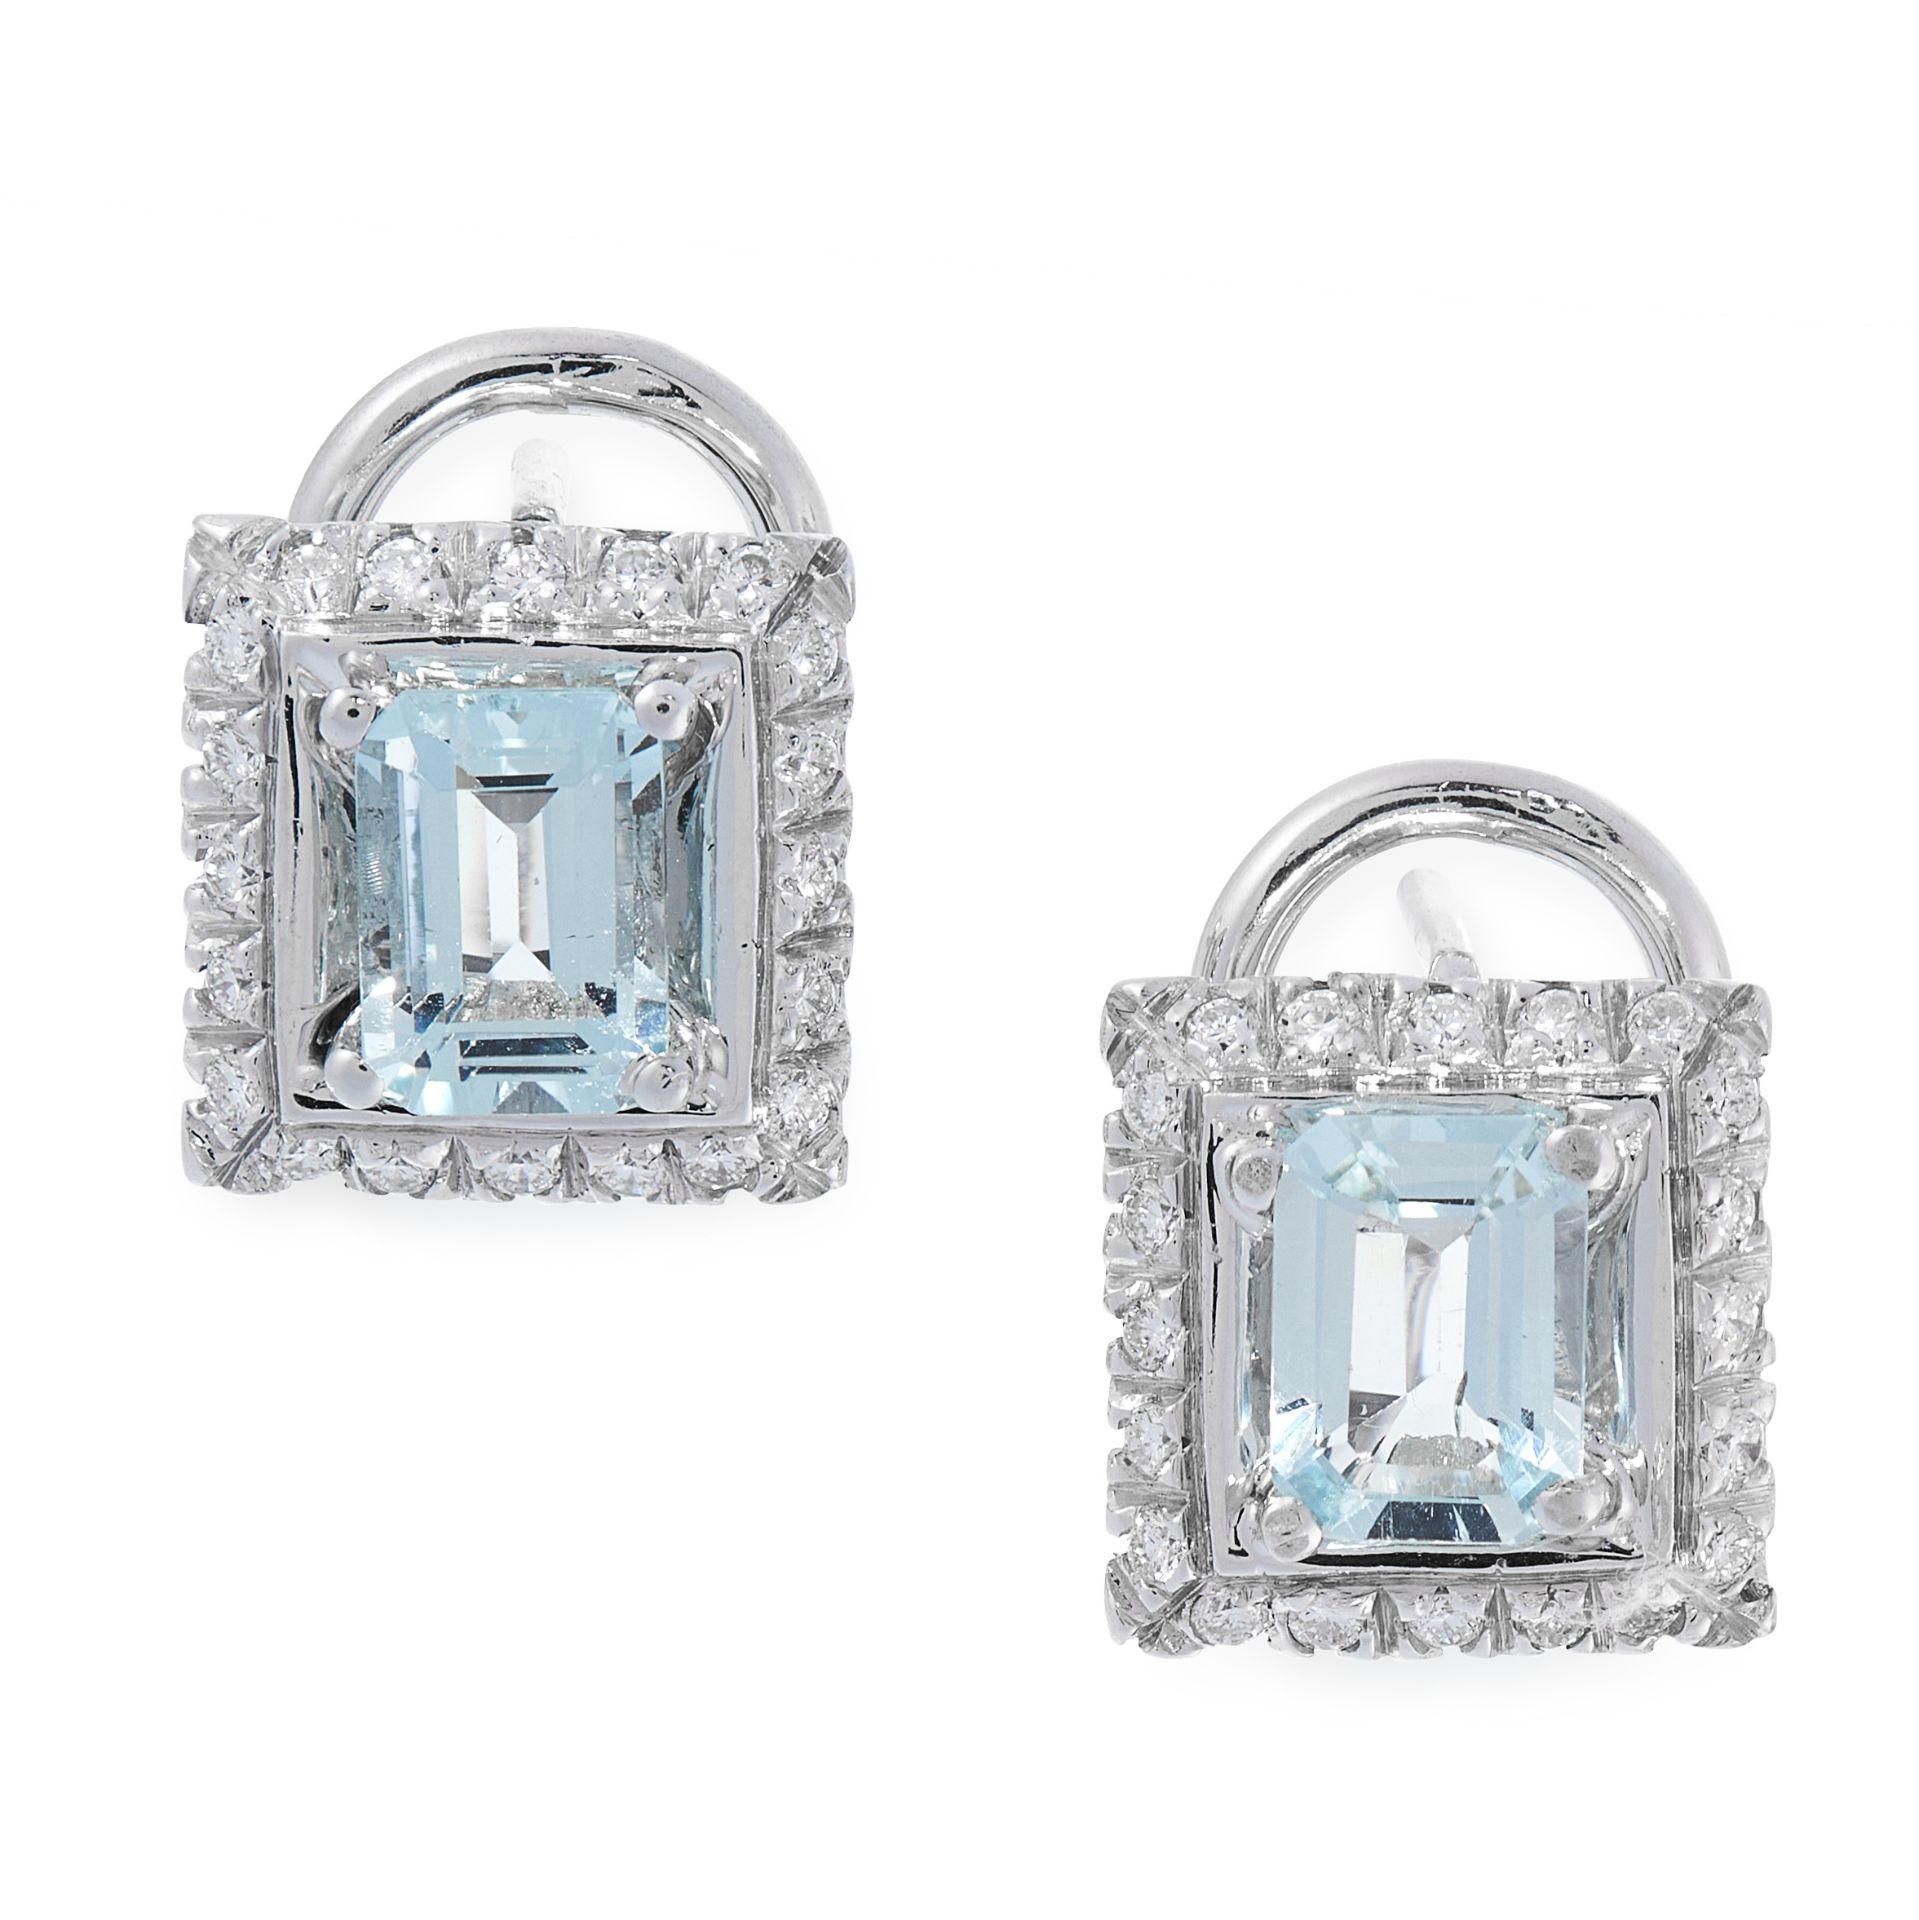 A PAIR OF AQUAMARINE AND DIAMOND STUD EARRINGS in 18ct white gold, each set with an emerald cut